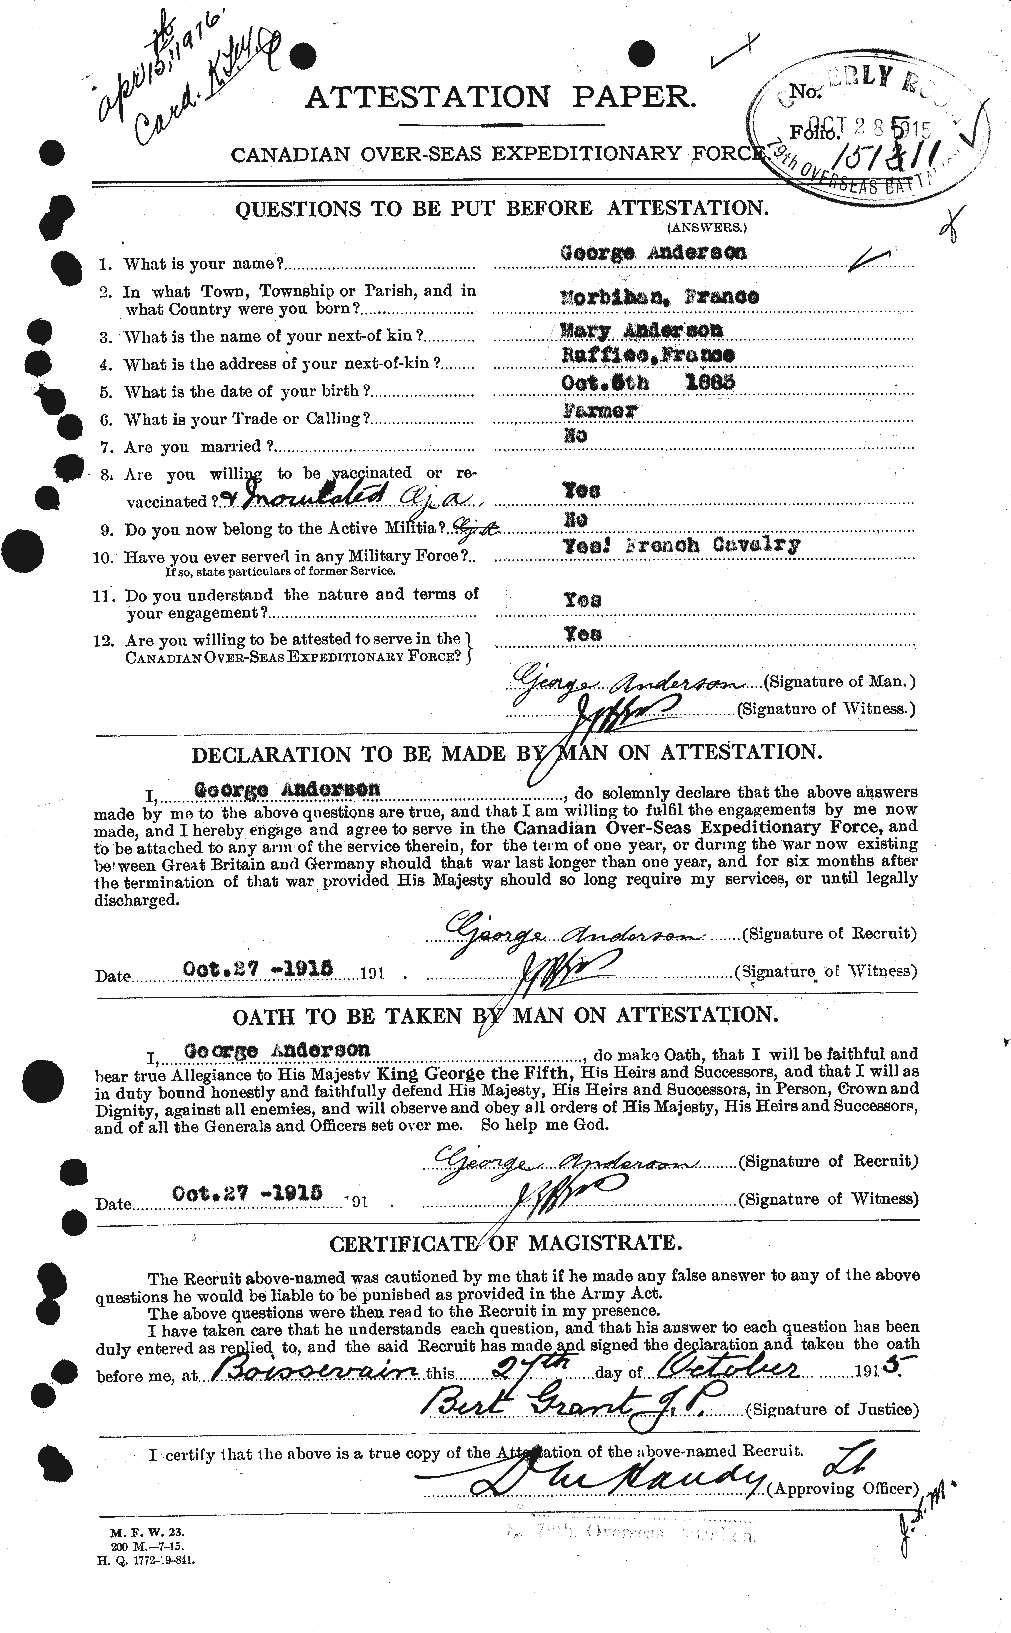 Personnel Records of the First World War - CEF 209787a